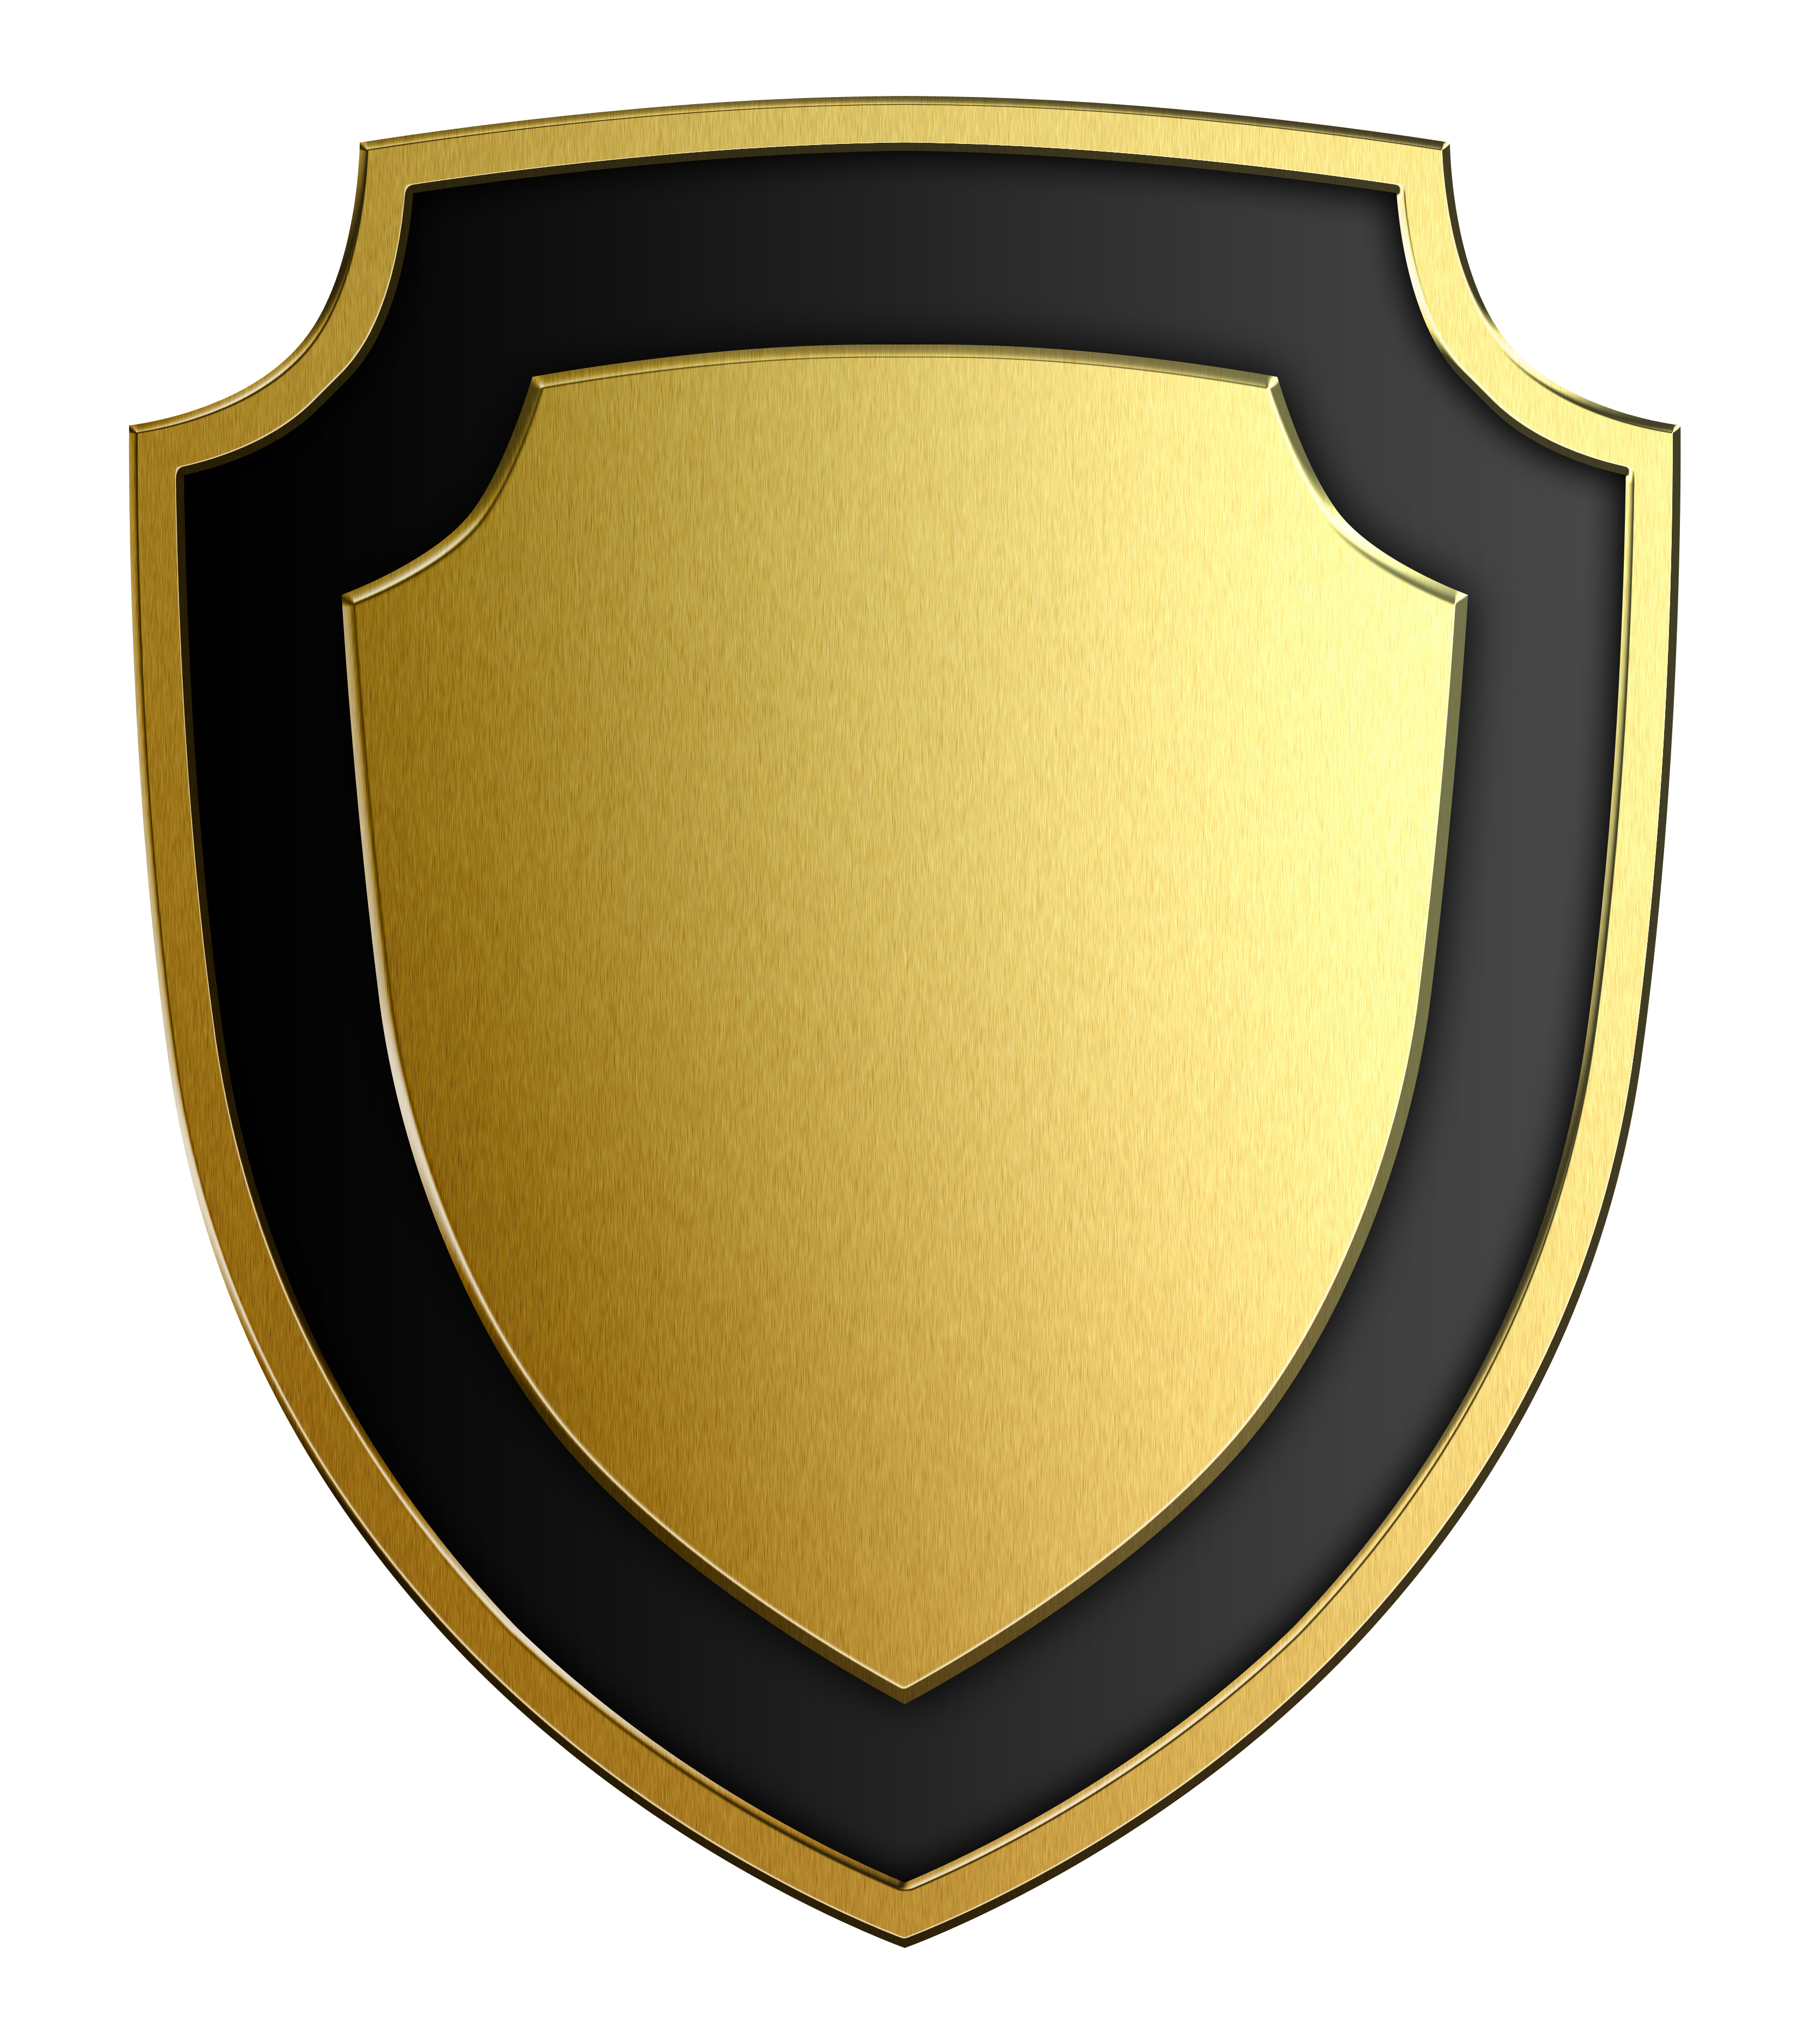 Image of shield clipart 0 sword and shield clip art free 2